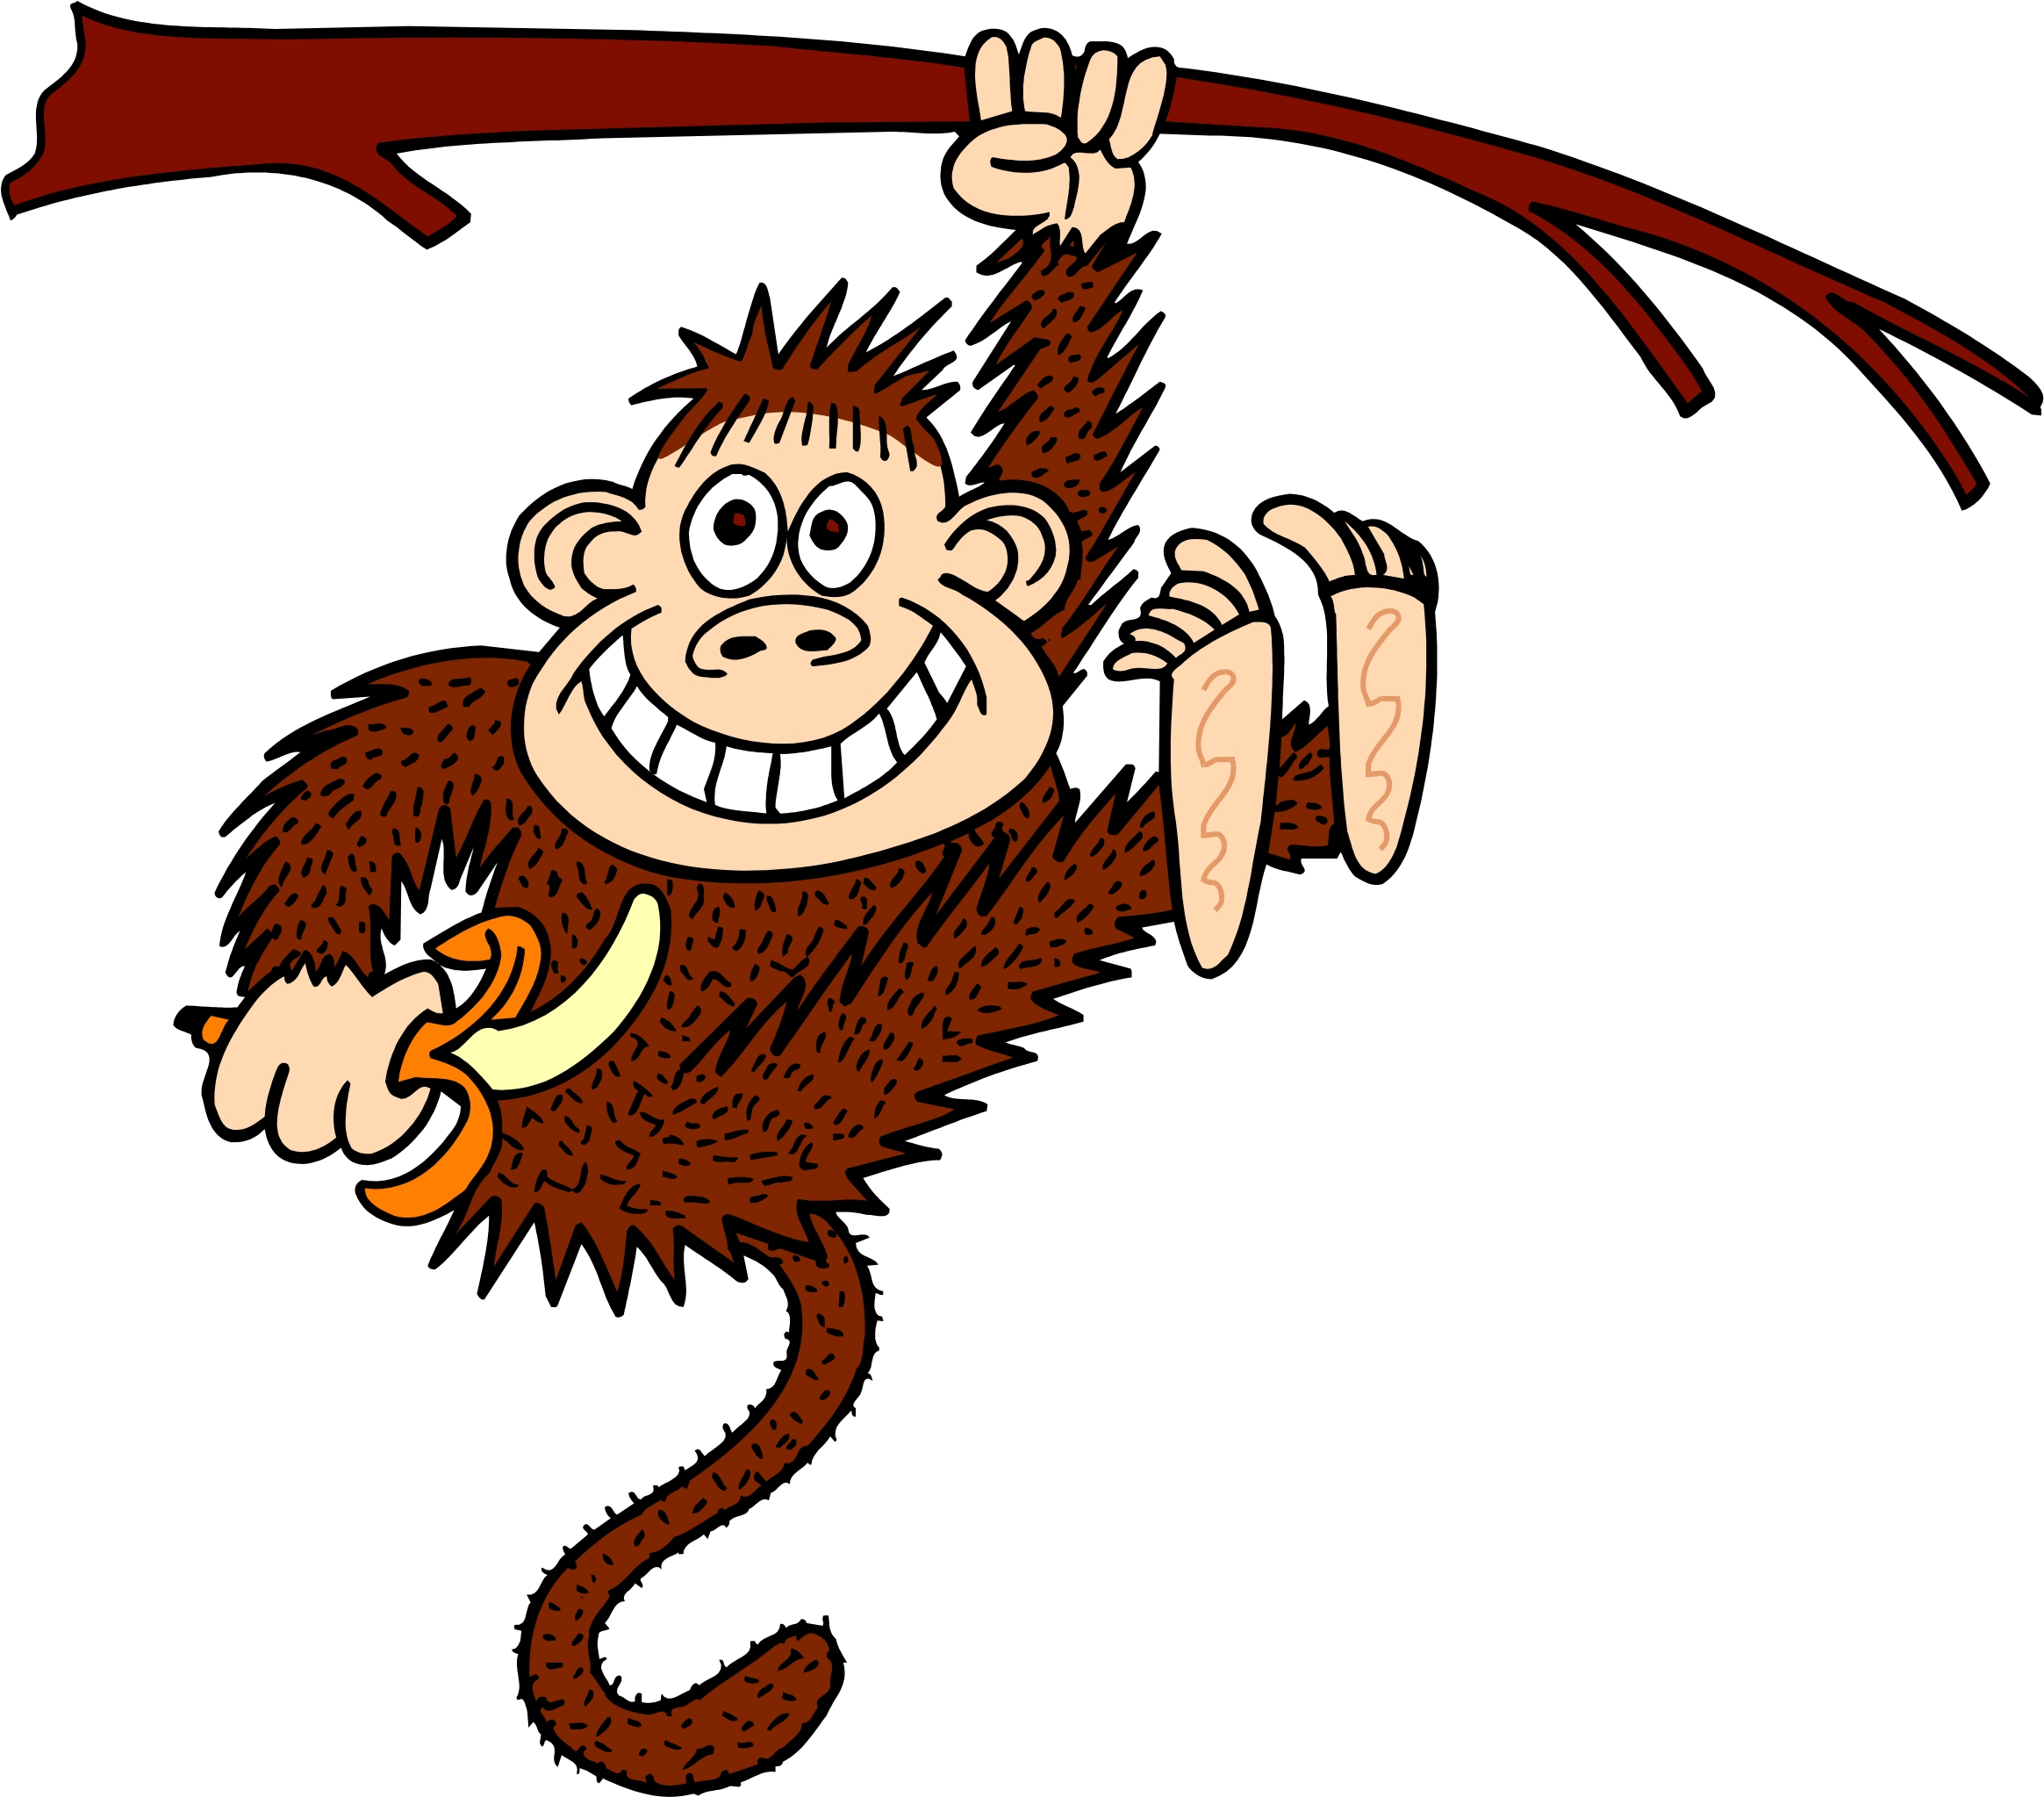 Hanging Monkey Clip Art Images & Pictures - Becuo